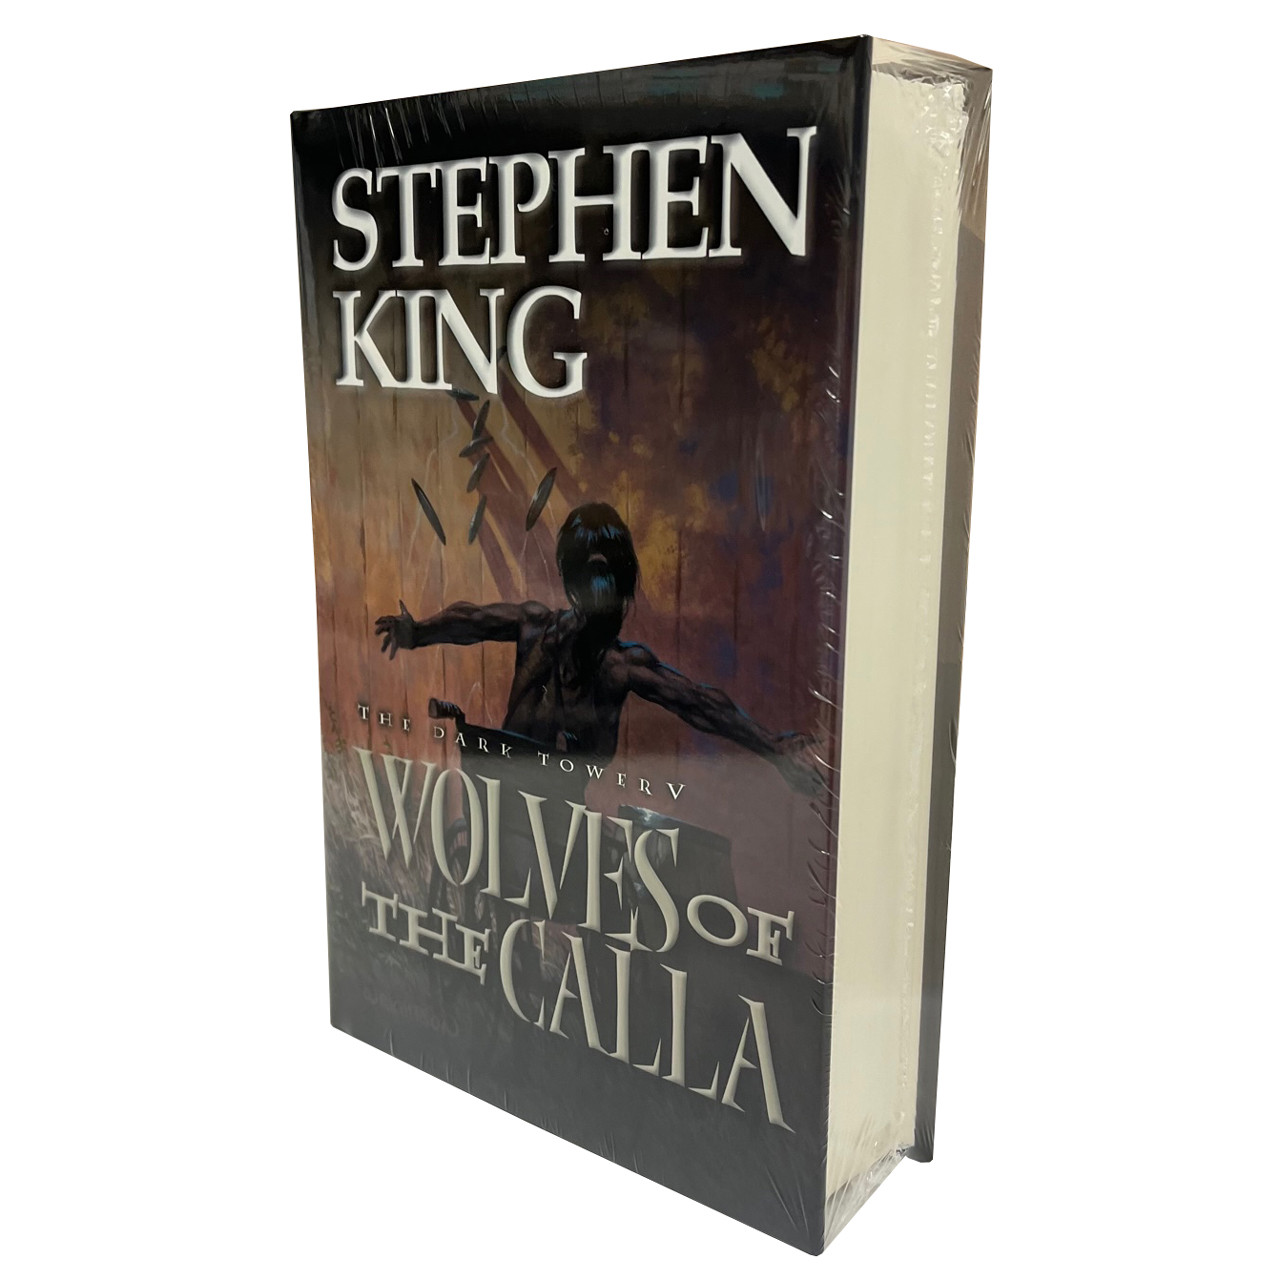 Stephen King "The Dark Tower V: Wolves of the Calla" Signed Artist First Edition of 3,500 [Sealed/Very Fine]